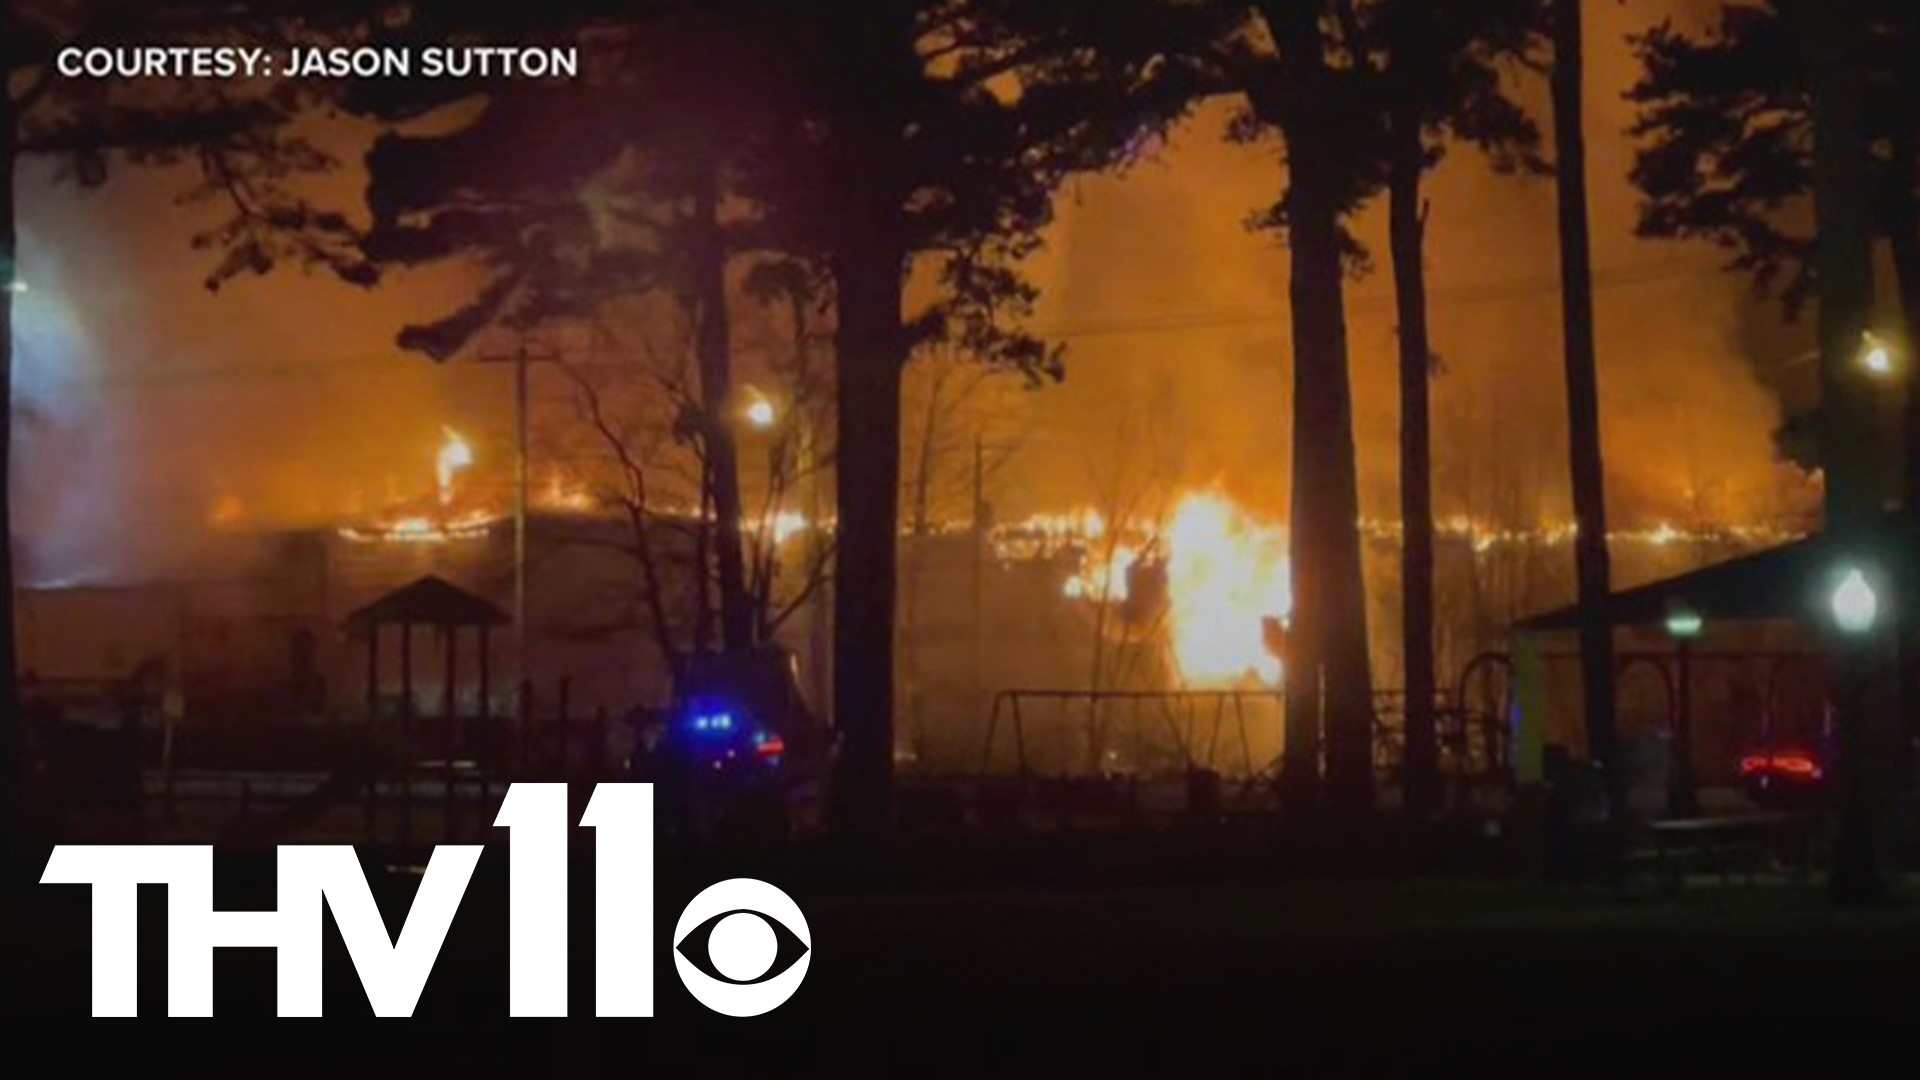 Overnight, two separate fires broke out in Arkansas. One fire occurred at an apartment complex in Searcy while the other broke out at the Pine Bluff mall.